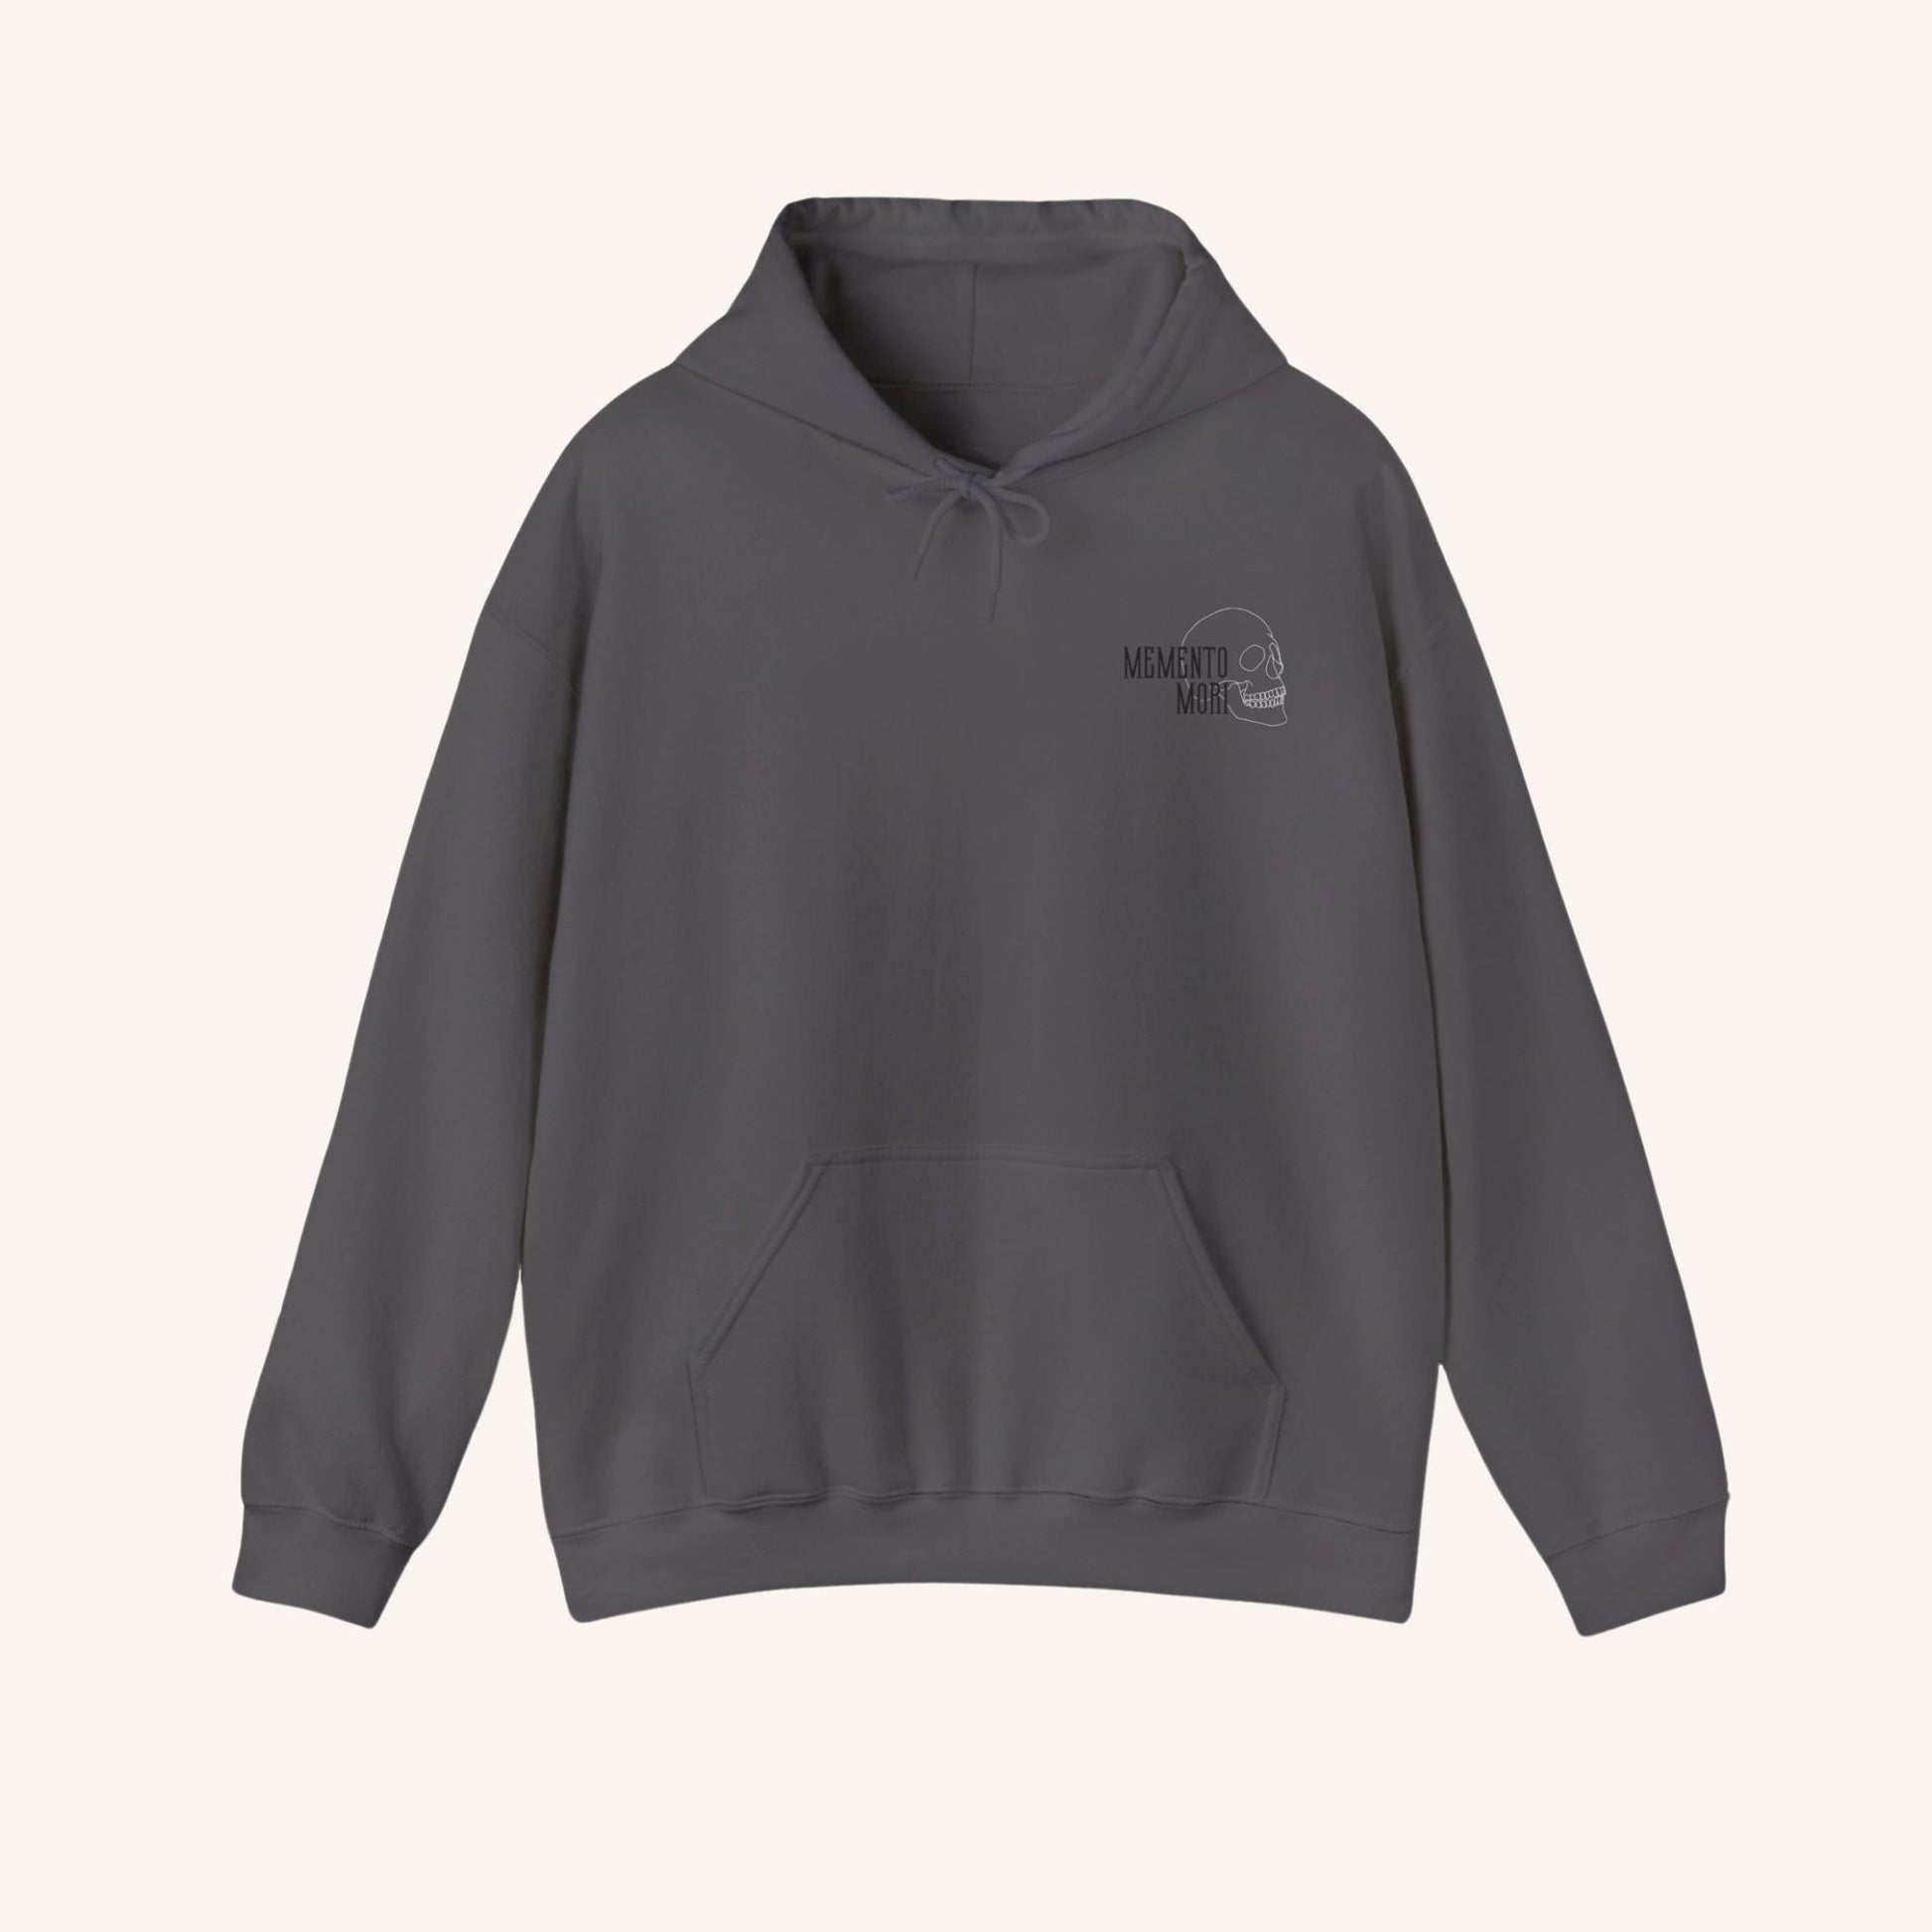 a gray hoodie with a black logo on it